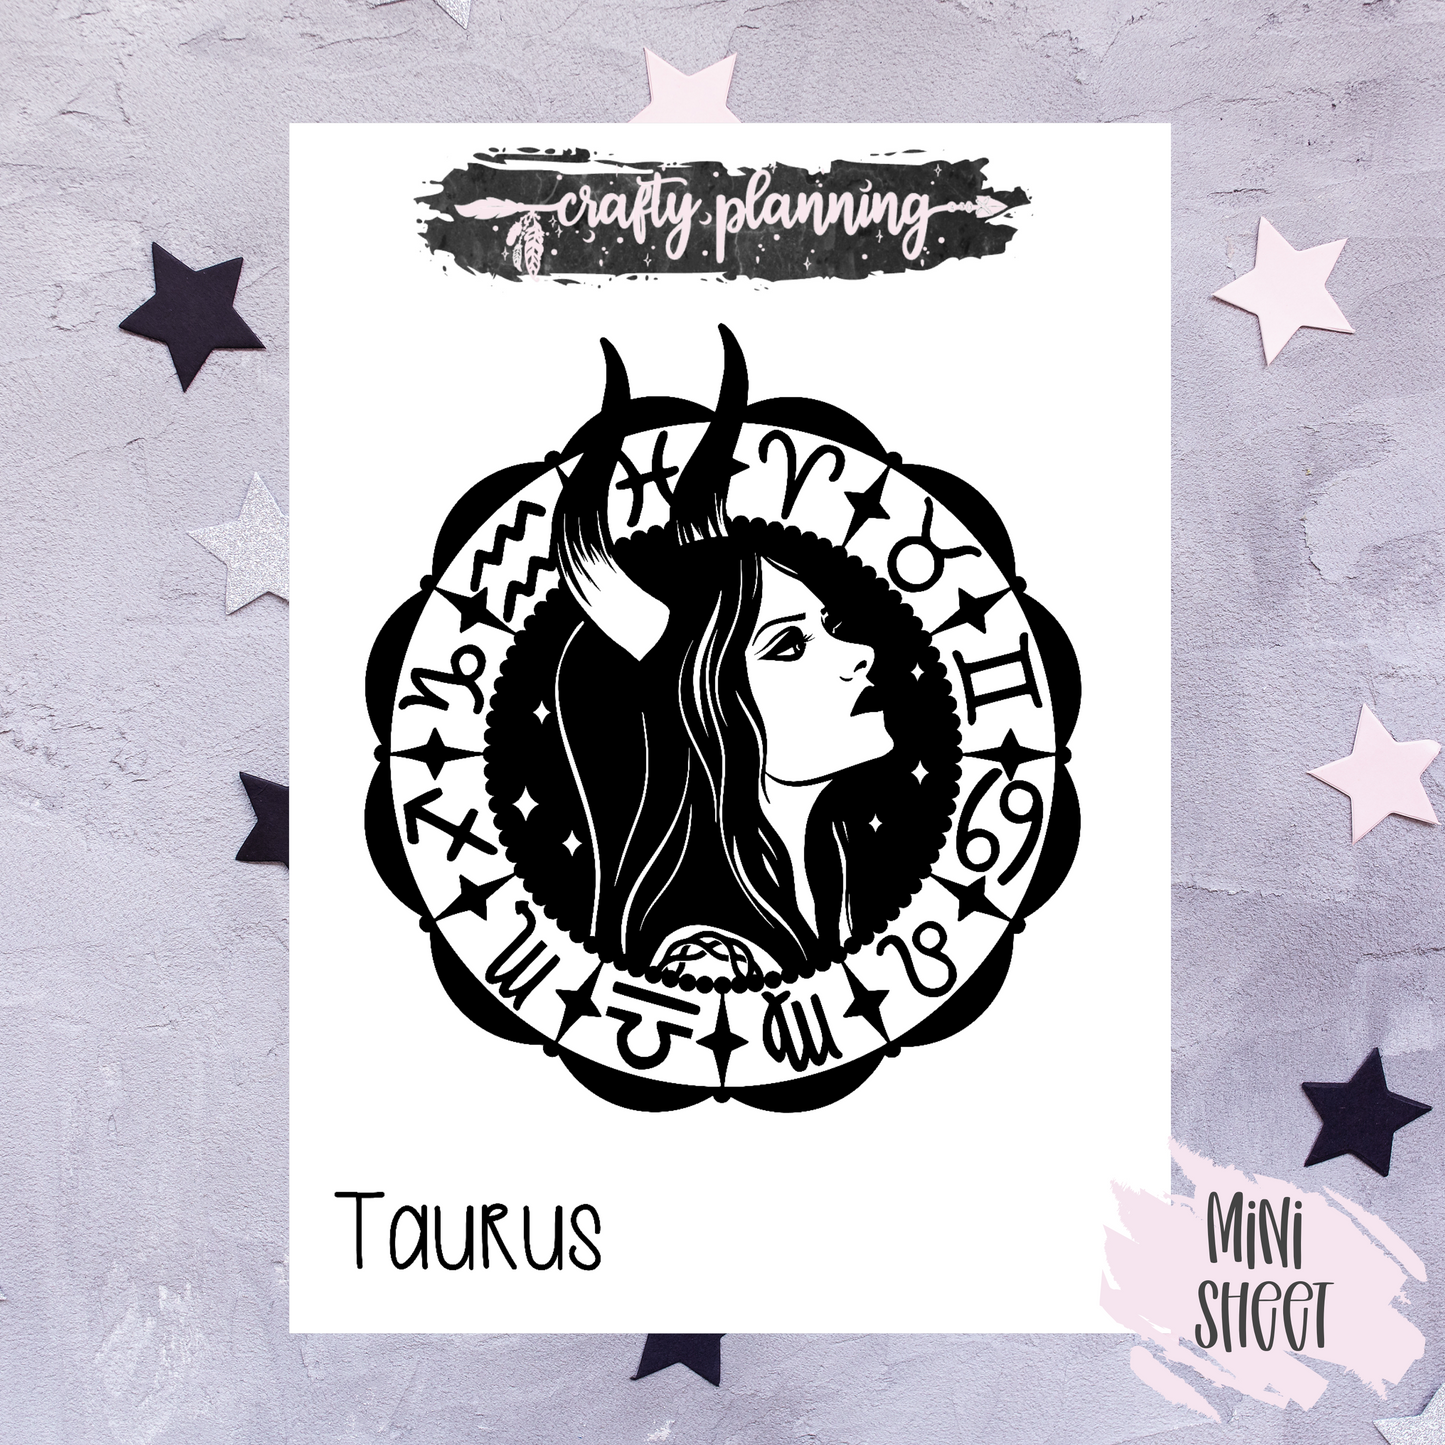 Taurus Stickers, Zodiac Stickers, Star Sign Stickers, Gothic Stickers, Witchcraft Stickers, Birthday Gift For Her, Astrology Stickers